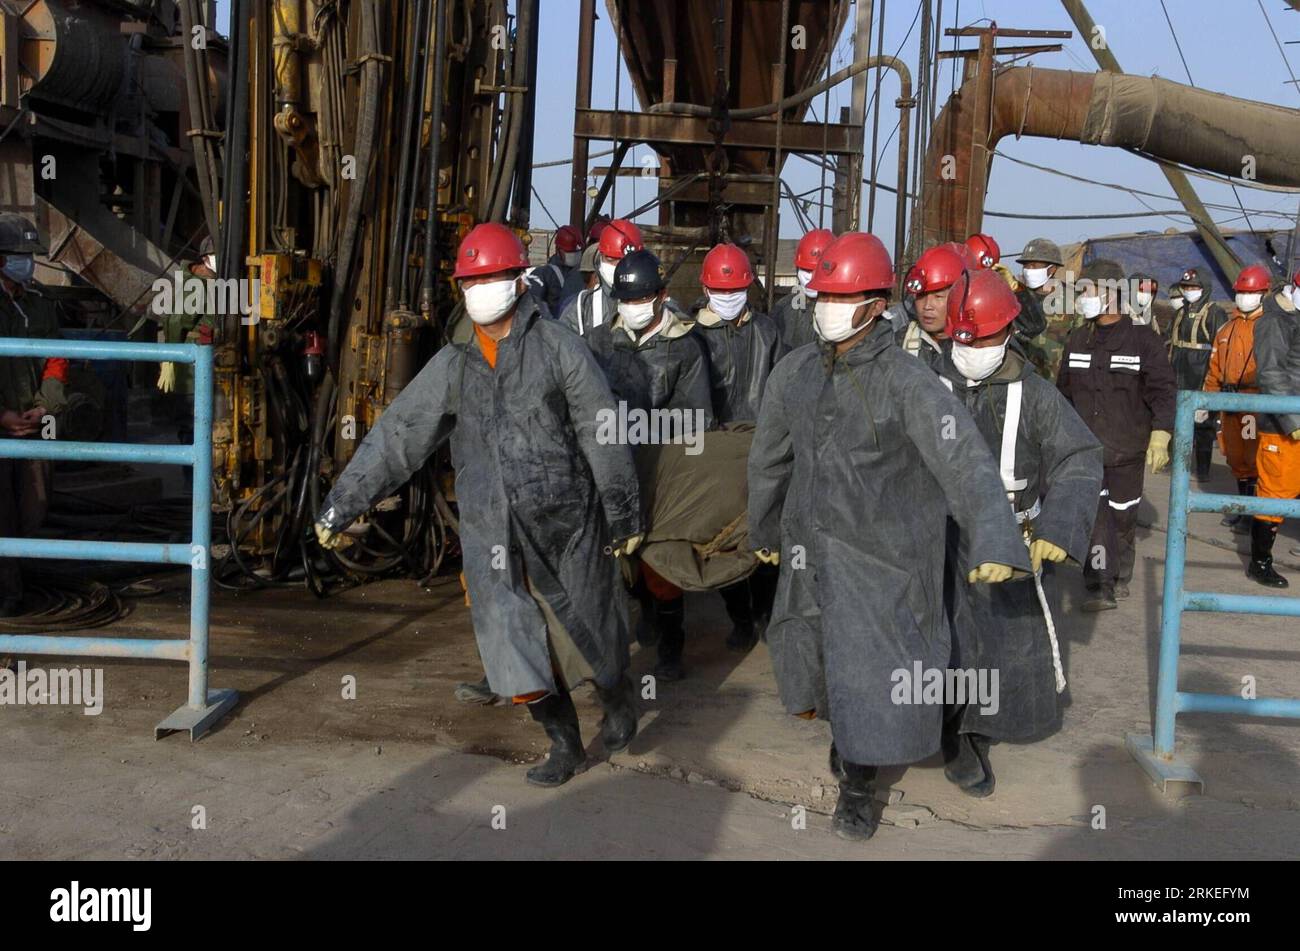 Bildnummer: 55250624  Datum: 10.04.2011  Copyright: imago/Xinhua ZHENGNING, April 10, 2011 (Xinhua) -- Rescuers carry a body at Hetaoyu coal mine in Zhengning county of northwest China s Gansu Province, April 10, 2011. A 6-ton bucket full of coal gangue fell down a 500-meter depth mine pit at Hetaoyu coal mine on April 5, 2010, trapping 6 workers underground. After days of rescue work, by 8:00 p.m. Sunday, one body was found, other 5 workers still missing. (Xinhua/Lian Zhenxiang) (xzj) CHINA-GANSU-ZHENGNING-COAL MINE ACCIDENT-RESCUE (CN) PUBLICATIONxNOTxINxCHN Gesellschaft Wirtschaft Mine Ungl Stock Photo